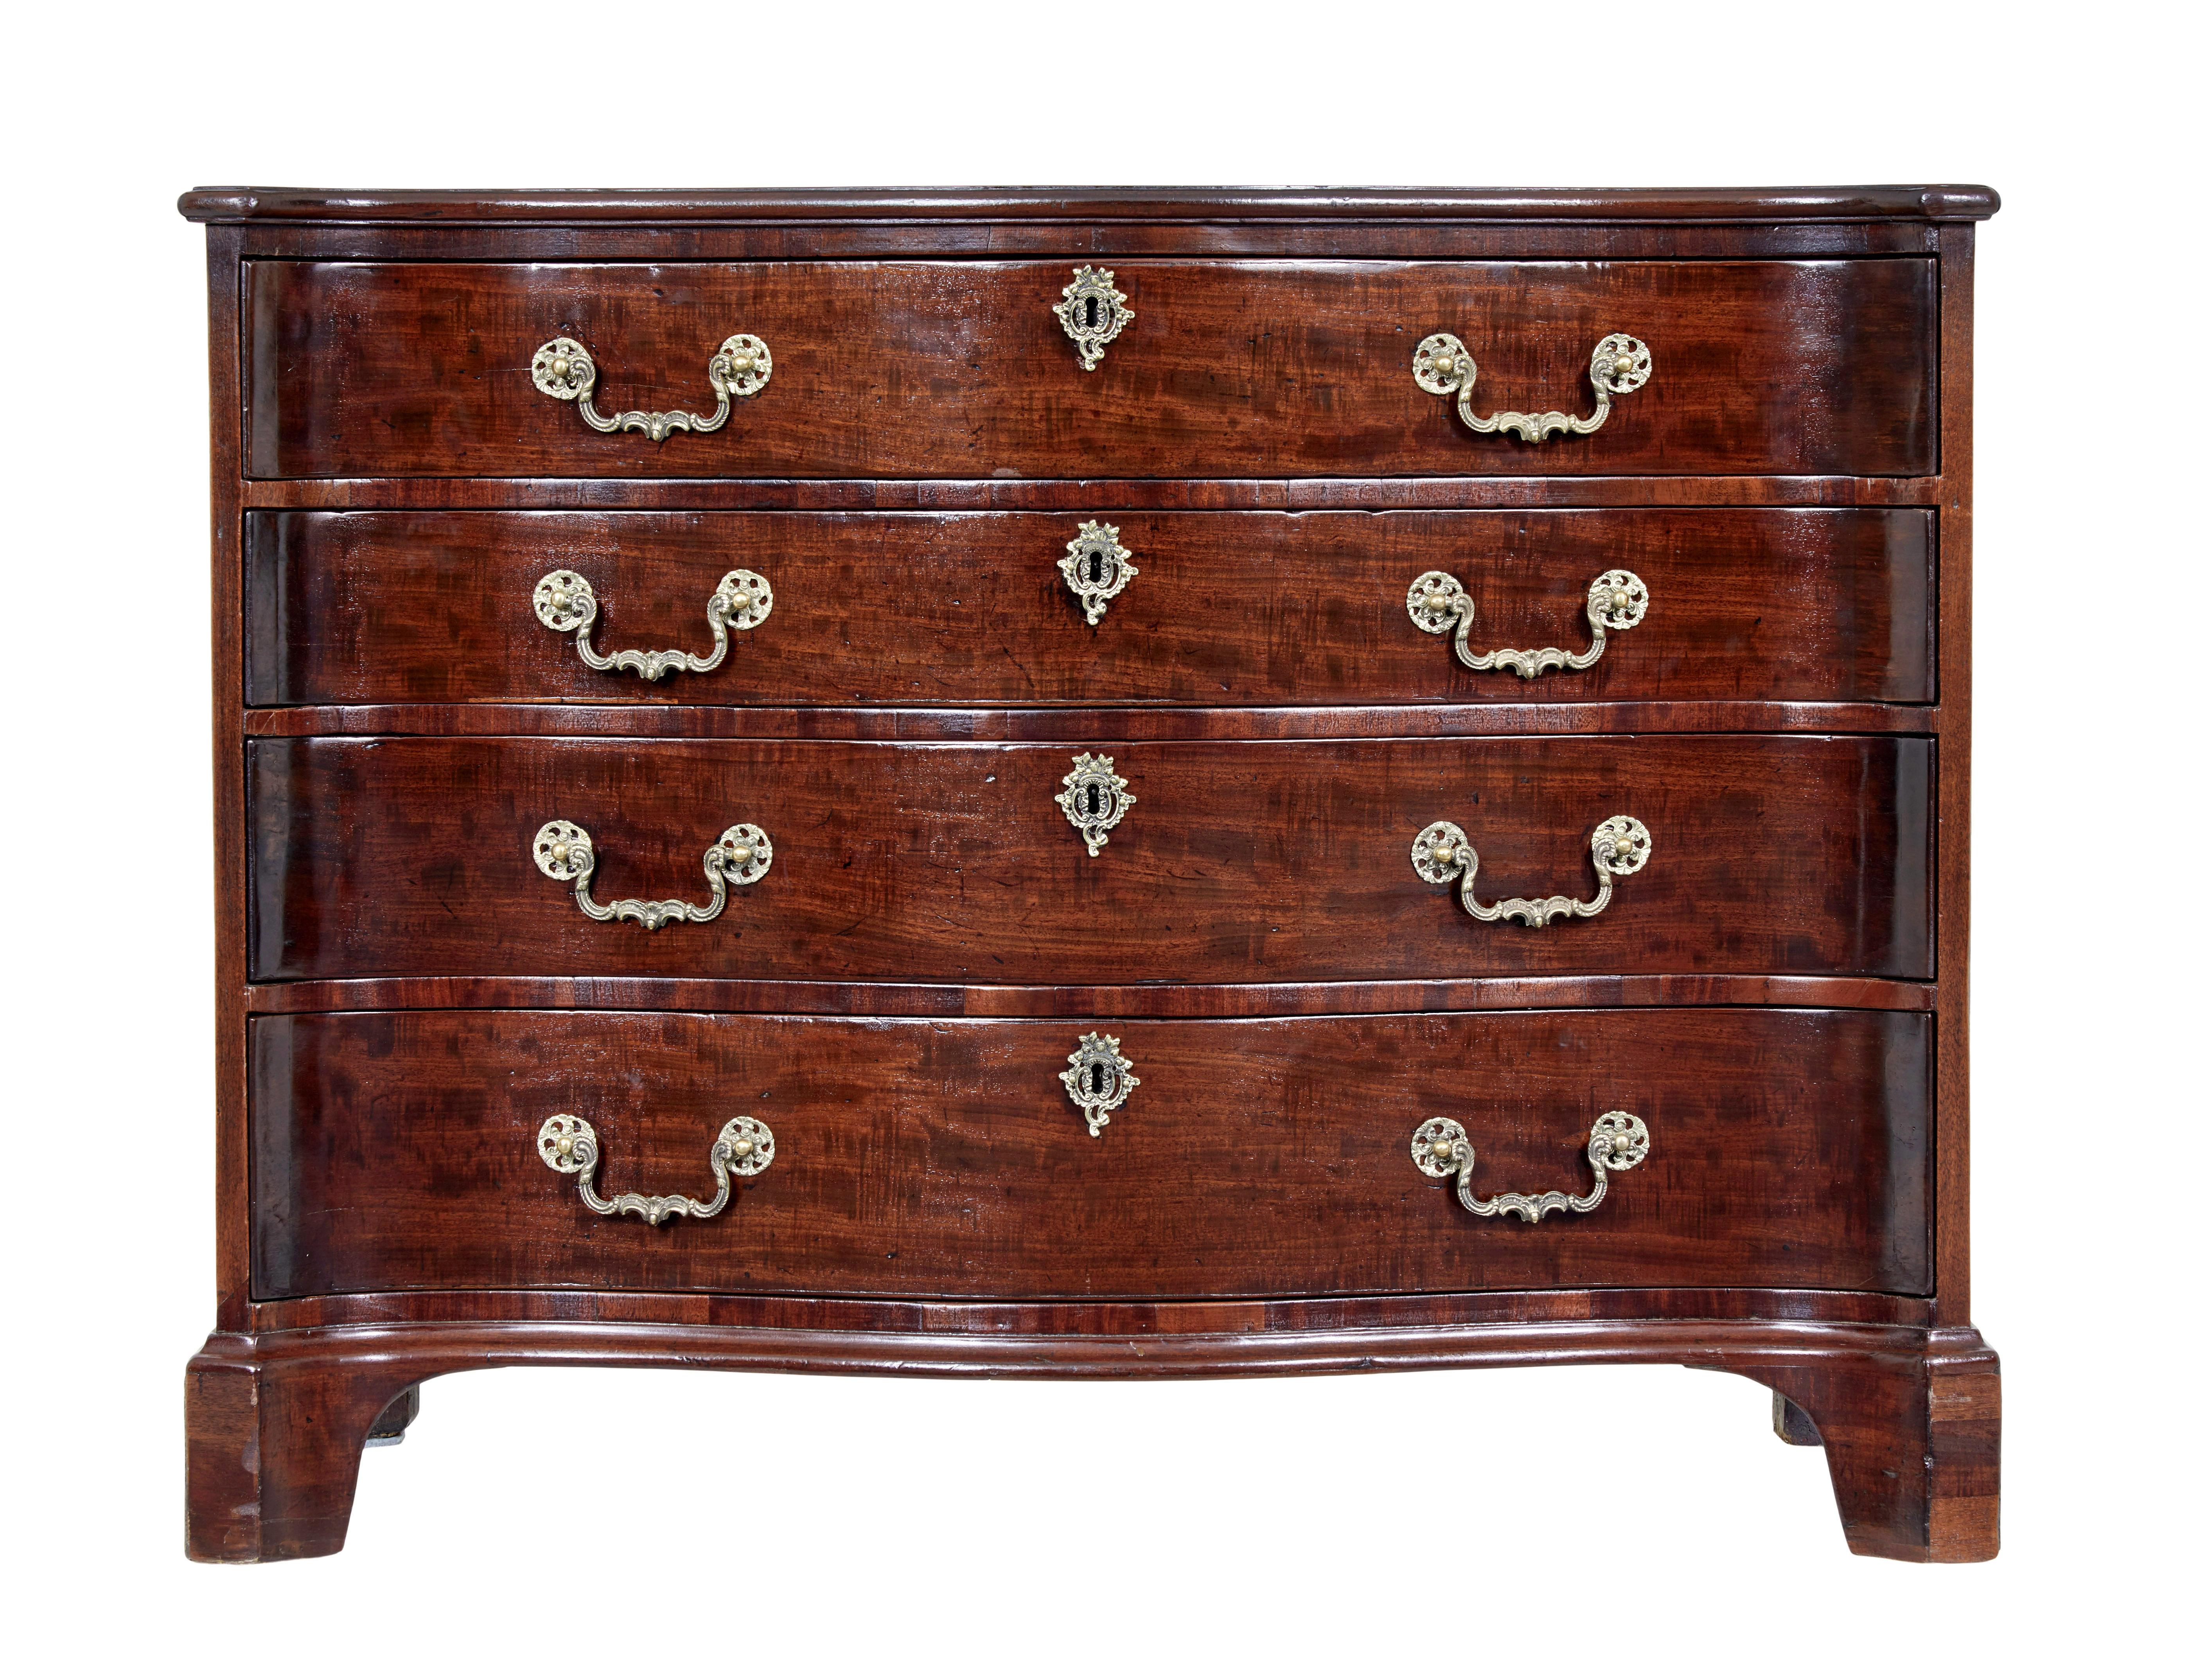 18th century George III mahogany serpentine chest of drawers circa 1760.

Fine quality serpentine shaped Georgian period chest of drawers complete with brushing slide.

Top surface made from a single piece of timber.  Chest comprises of 4 long